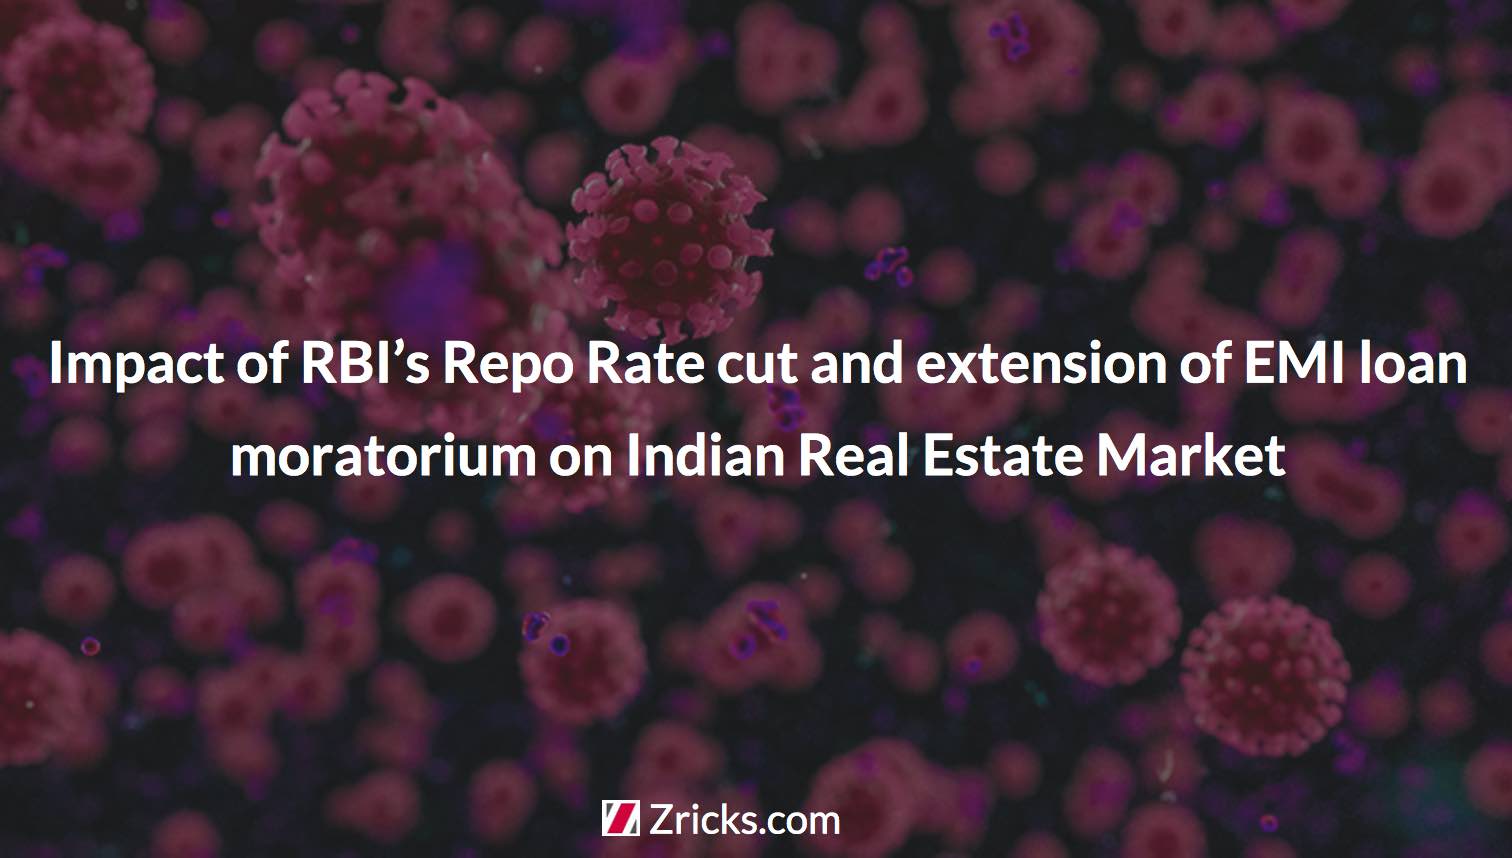 Impact of RBI’s Repo Rate cut and extension of EMI loan moratorium on Indian Real Estate Market Update